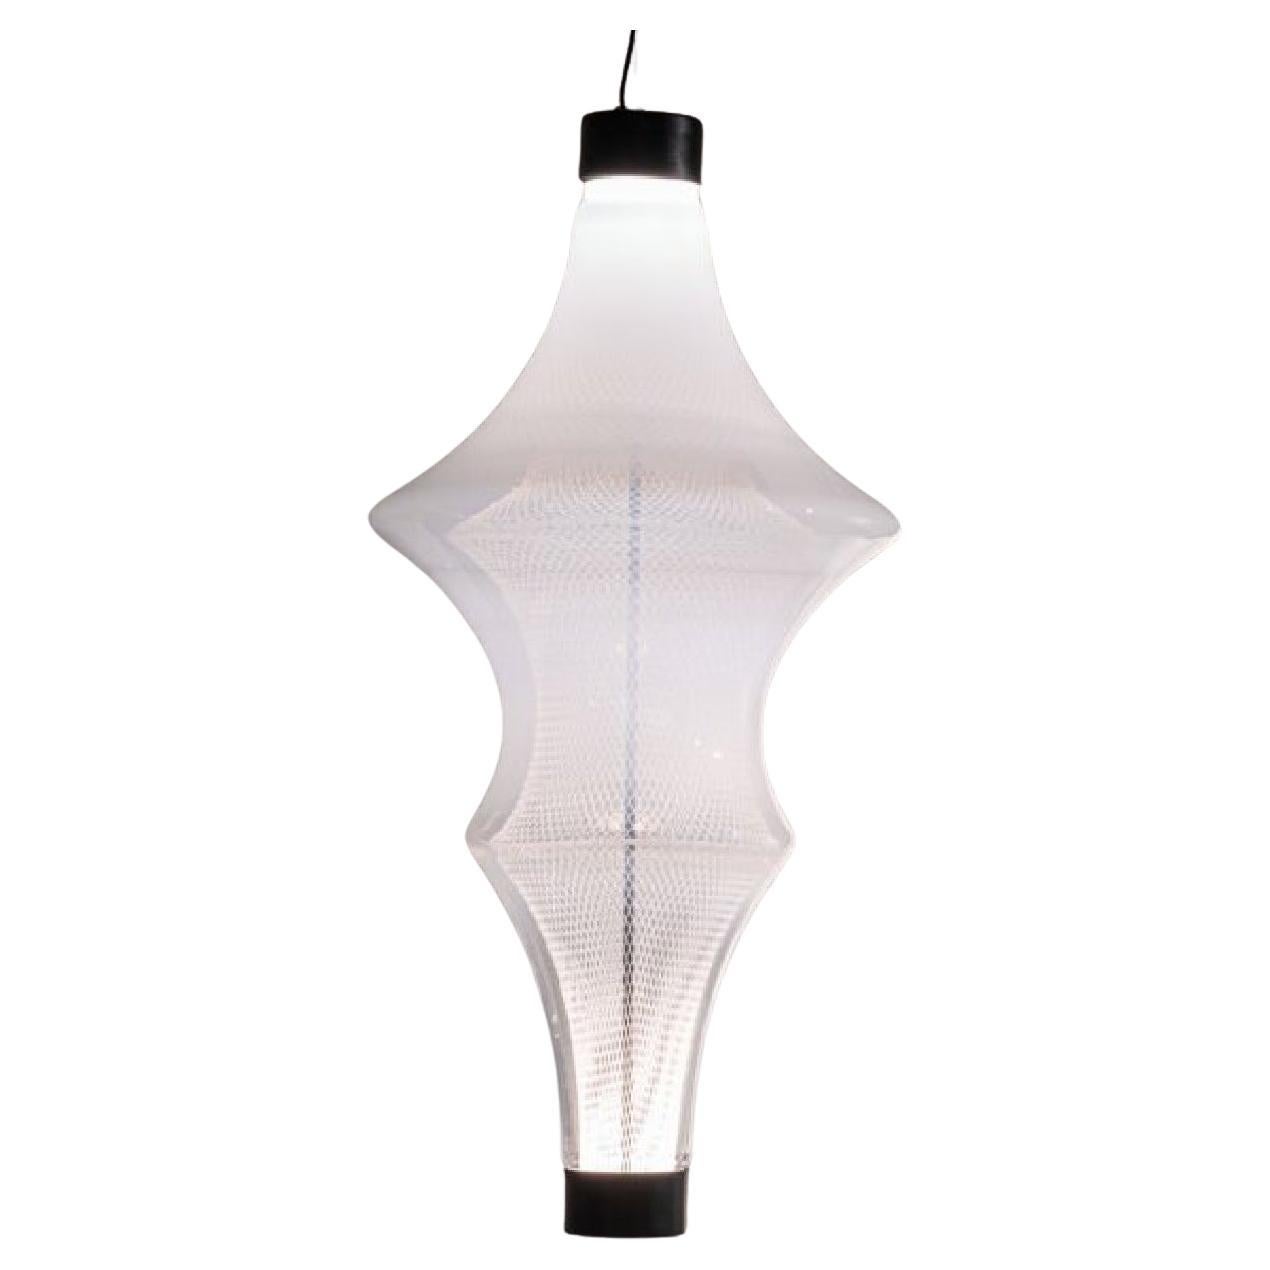 NASSE 02 Pendant lamp by Marco Zito & BTM for Wonderglass For Sale